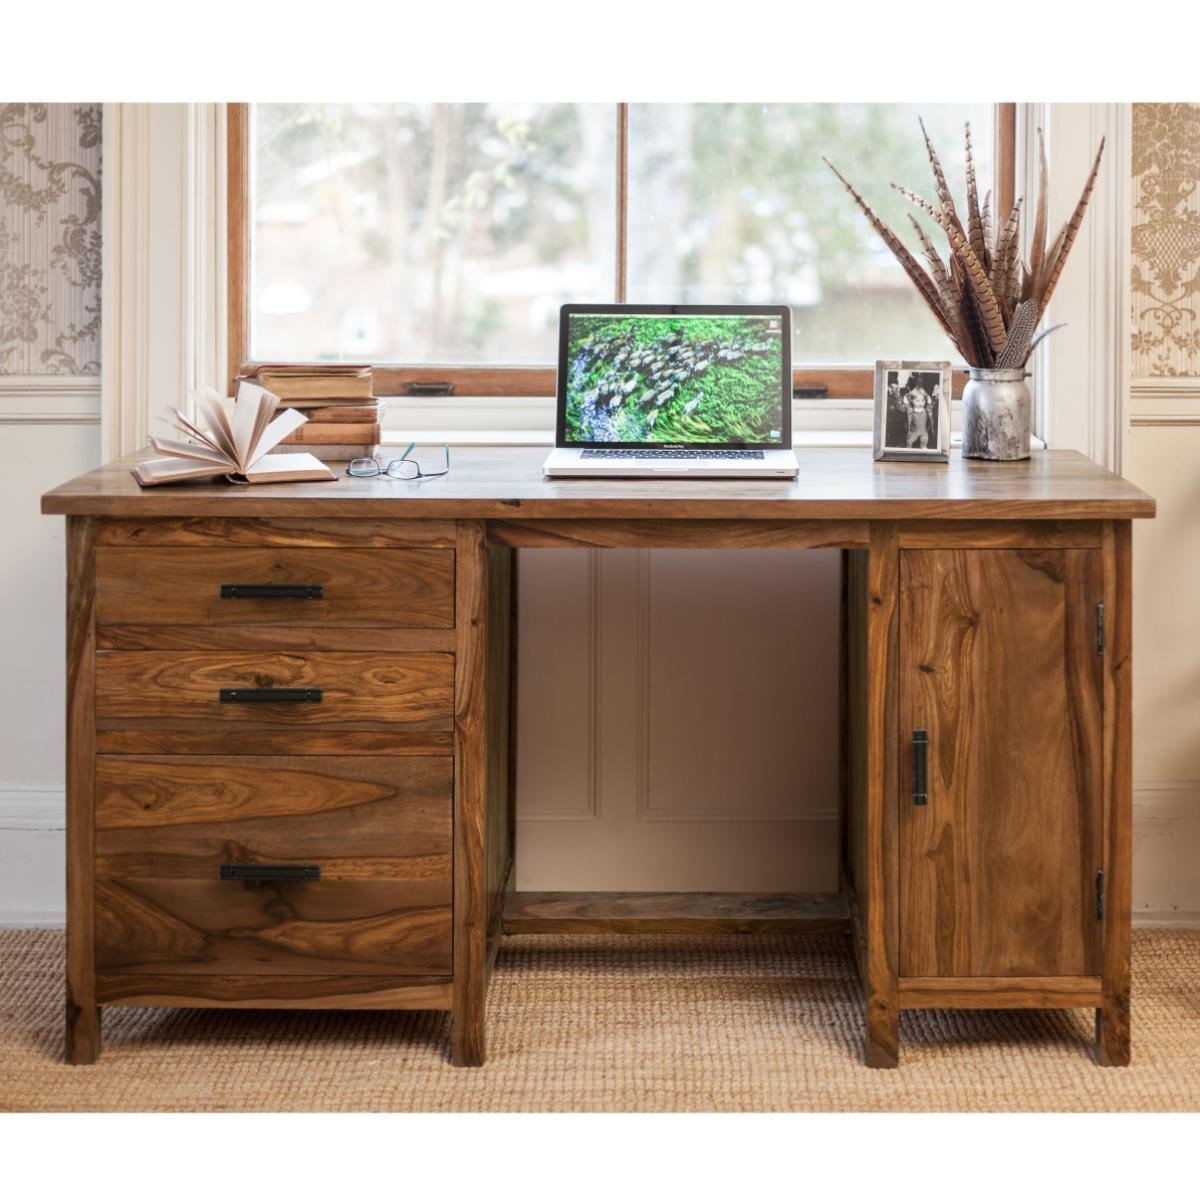 Wooden Study Table - Gladiolus Collection